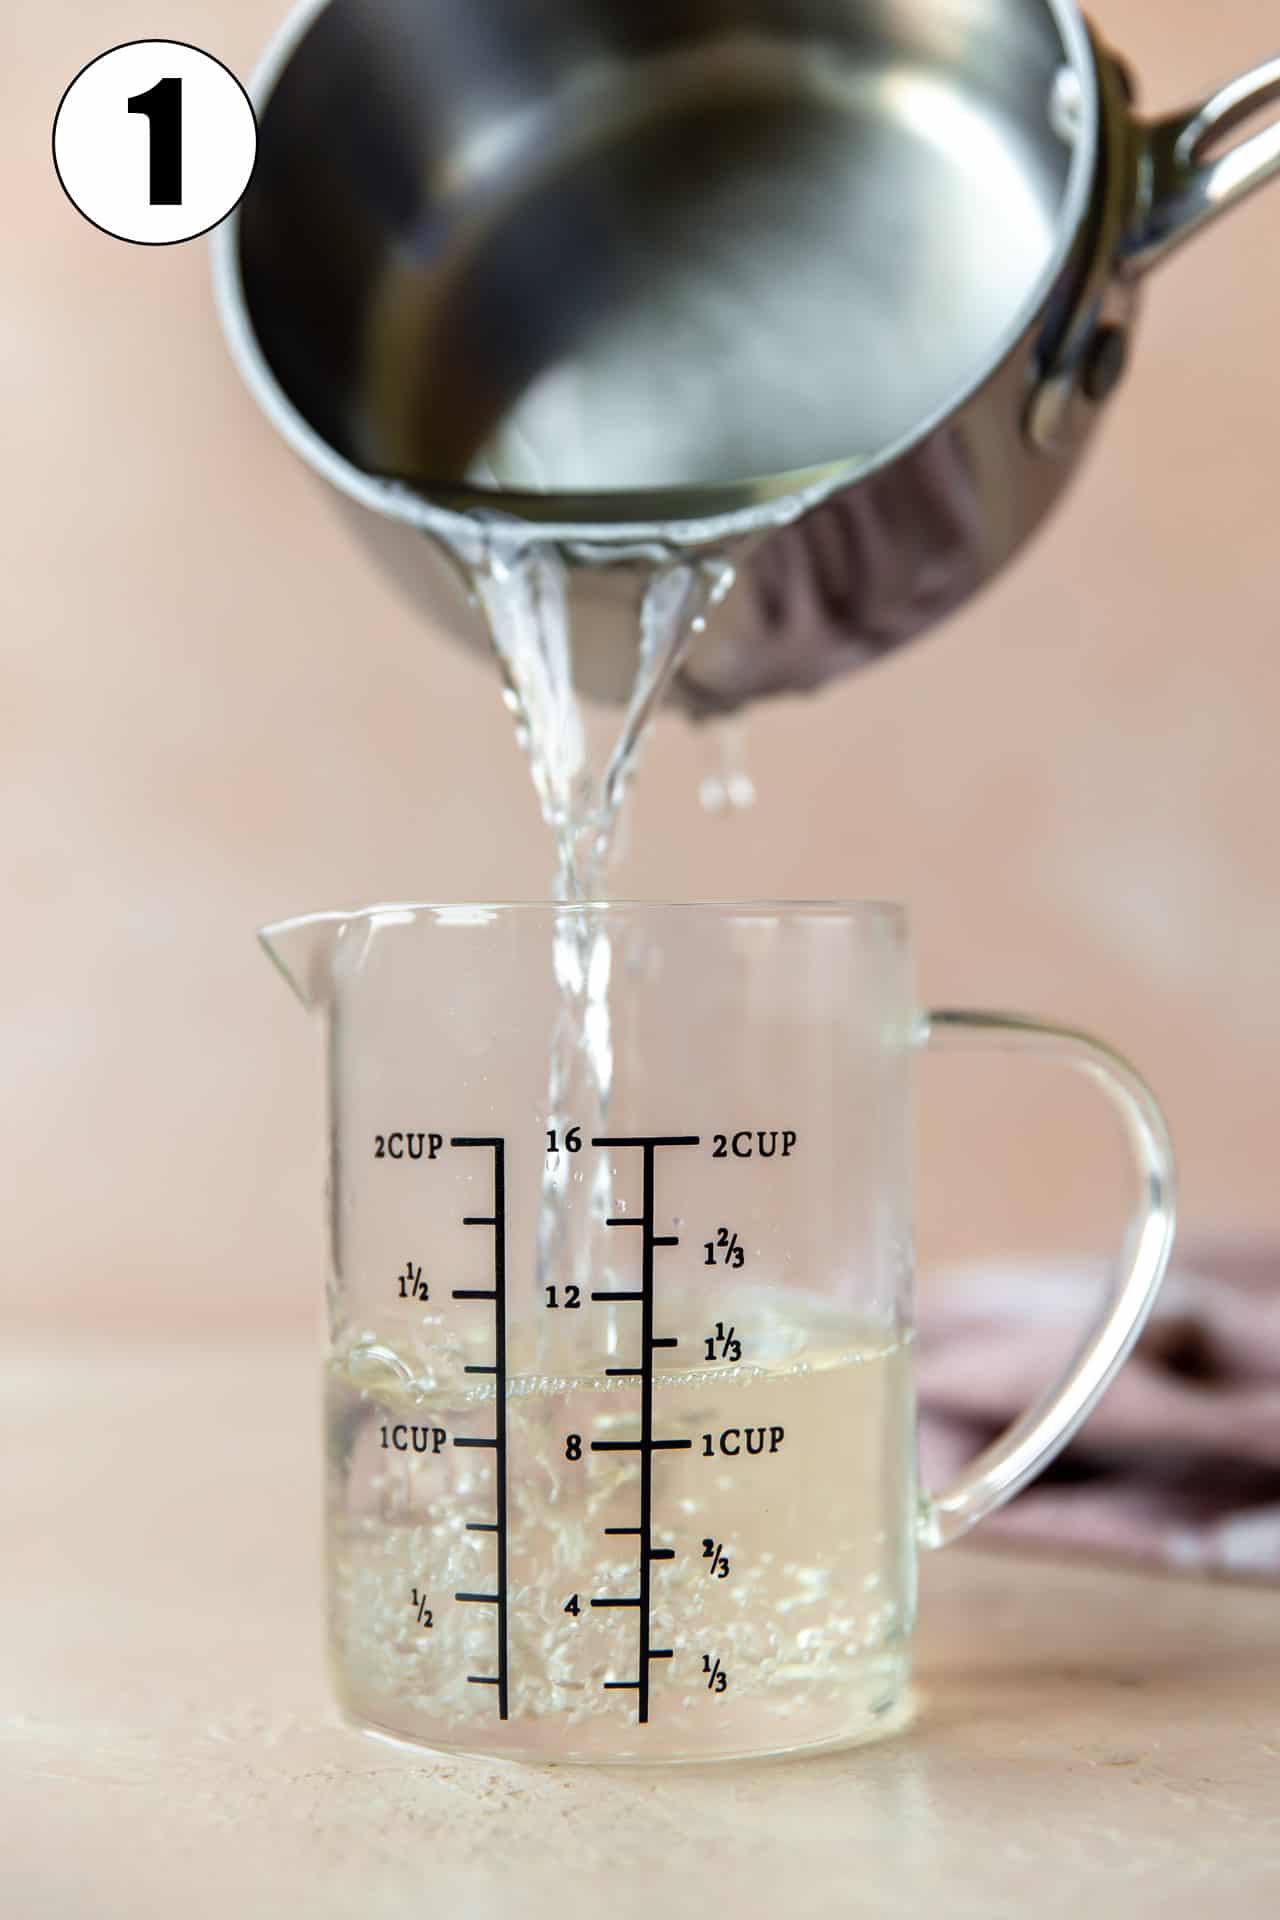 Simple syrup being poured into a measuring cup. 